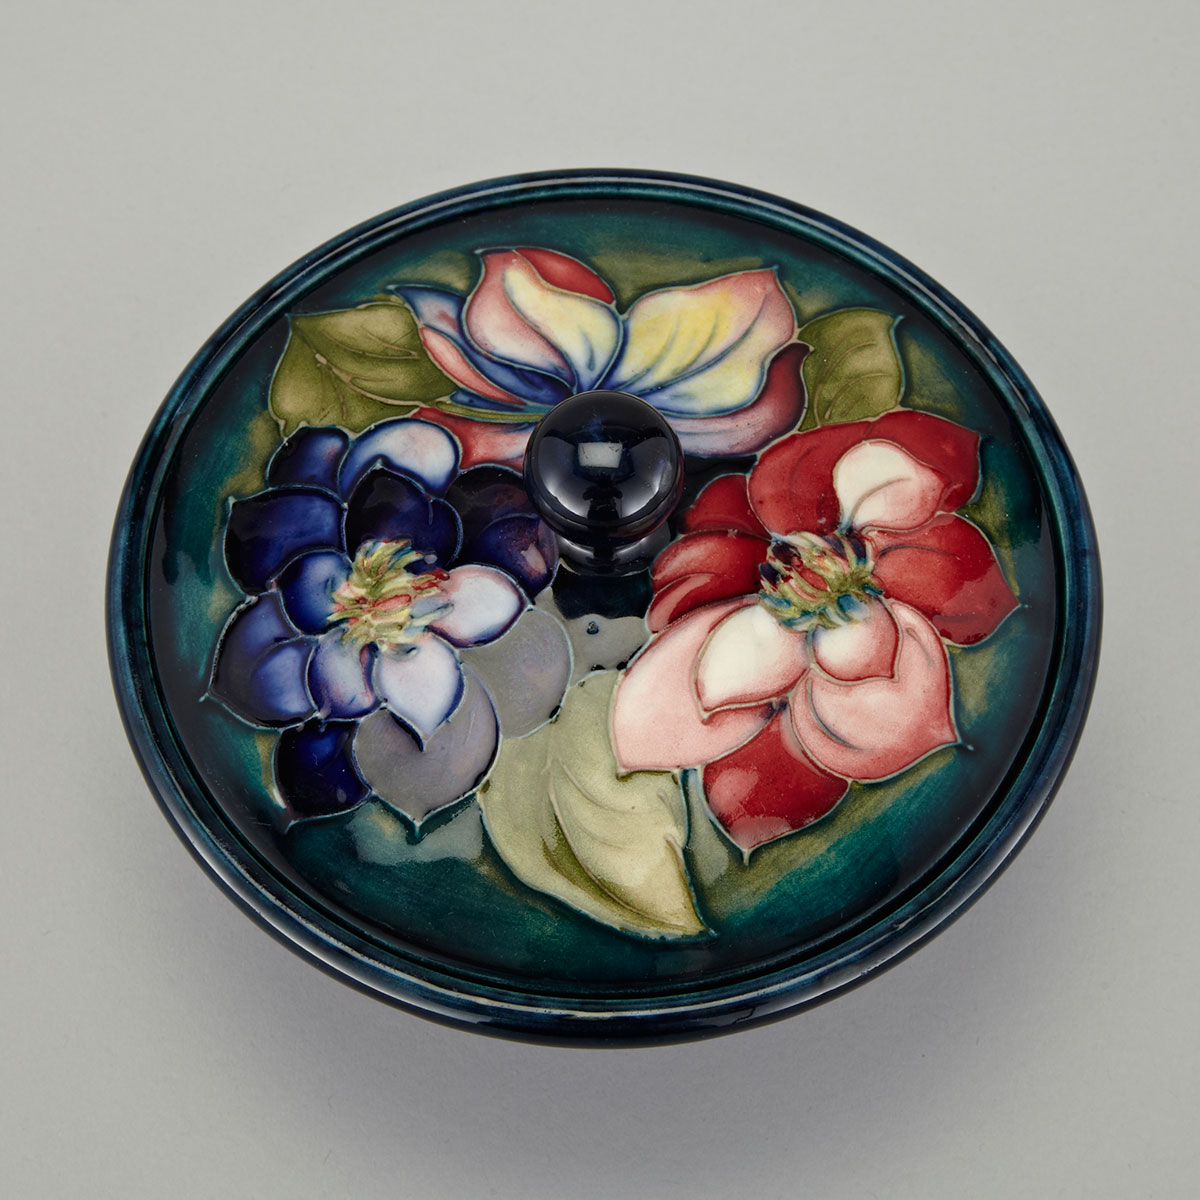 Moorcroft Clematis Covered Bowl, 1940s